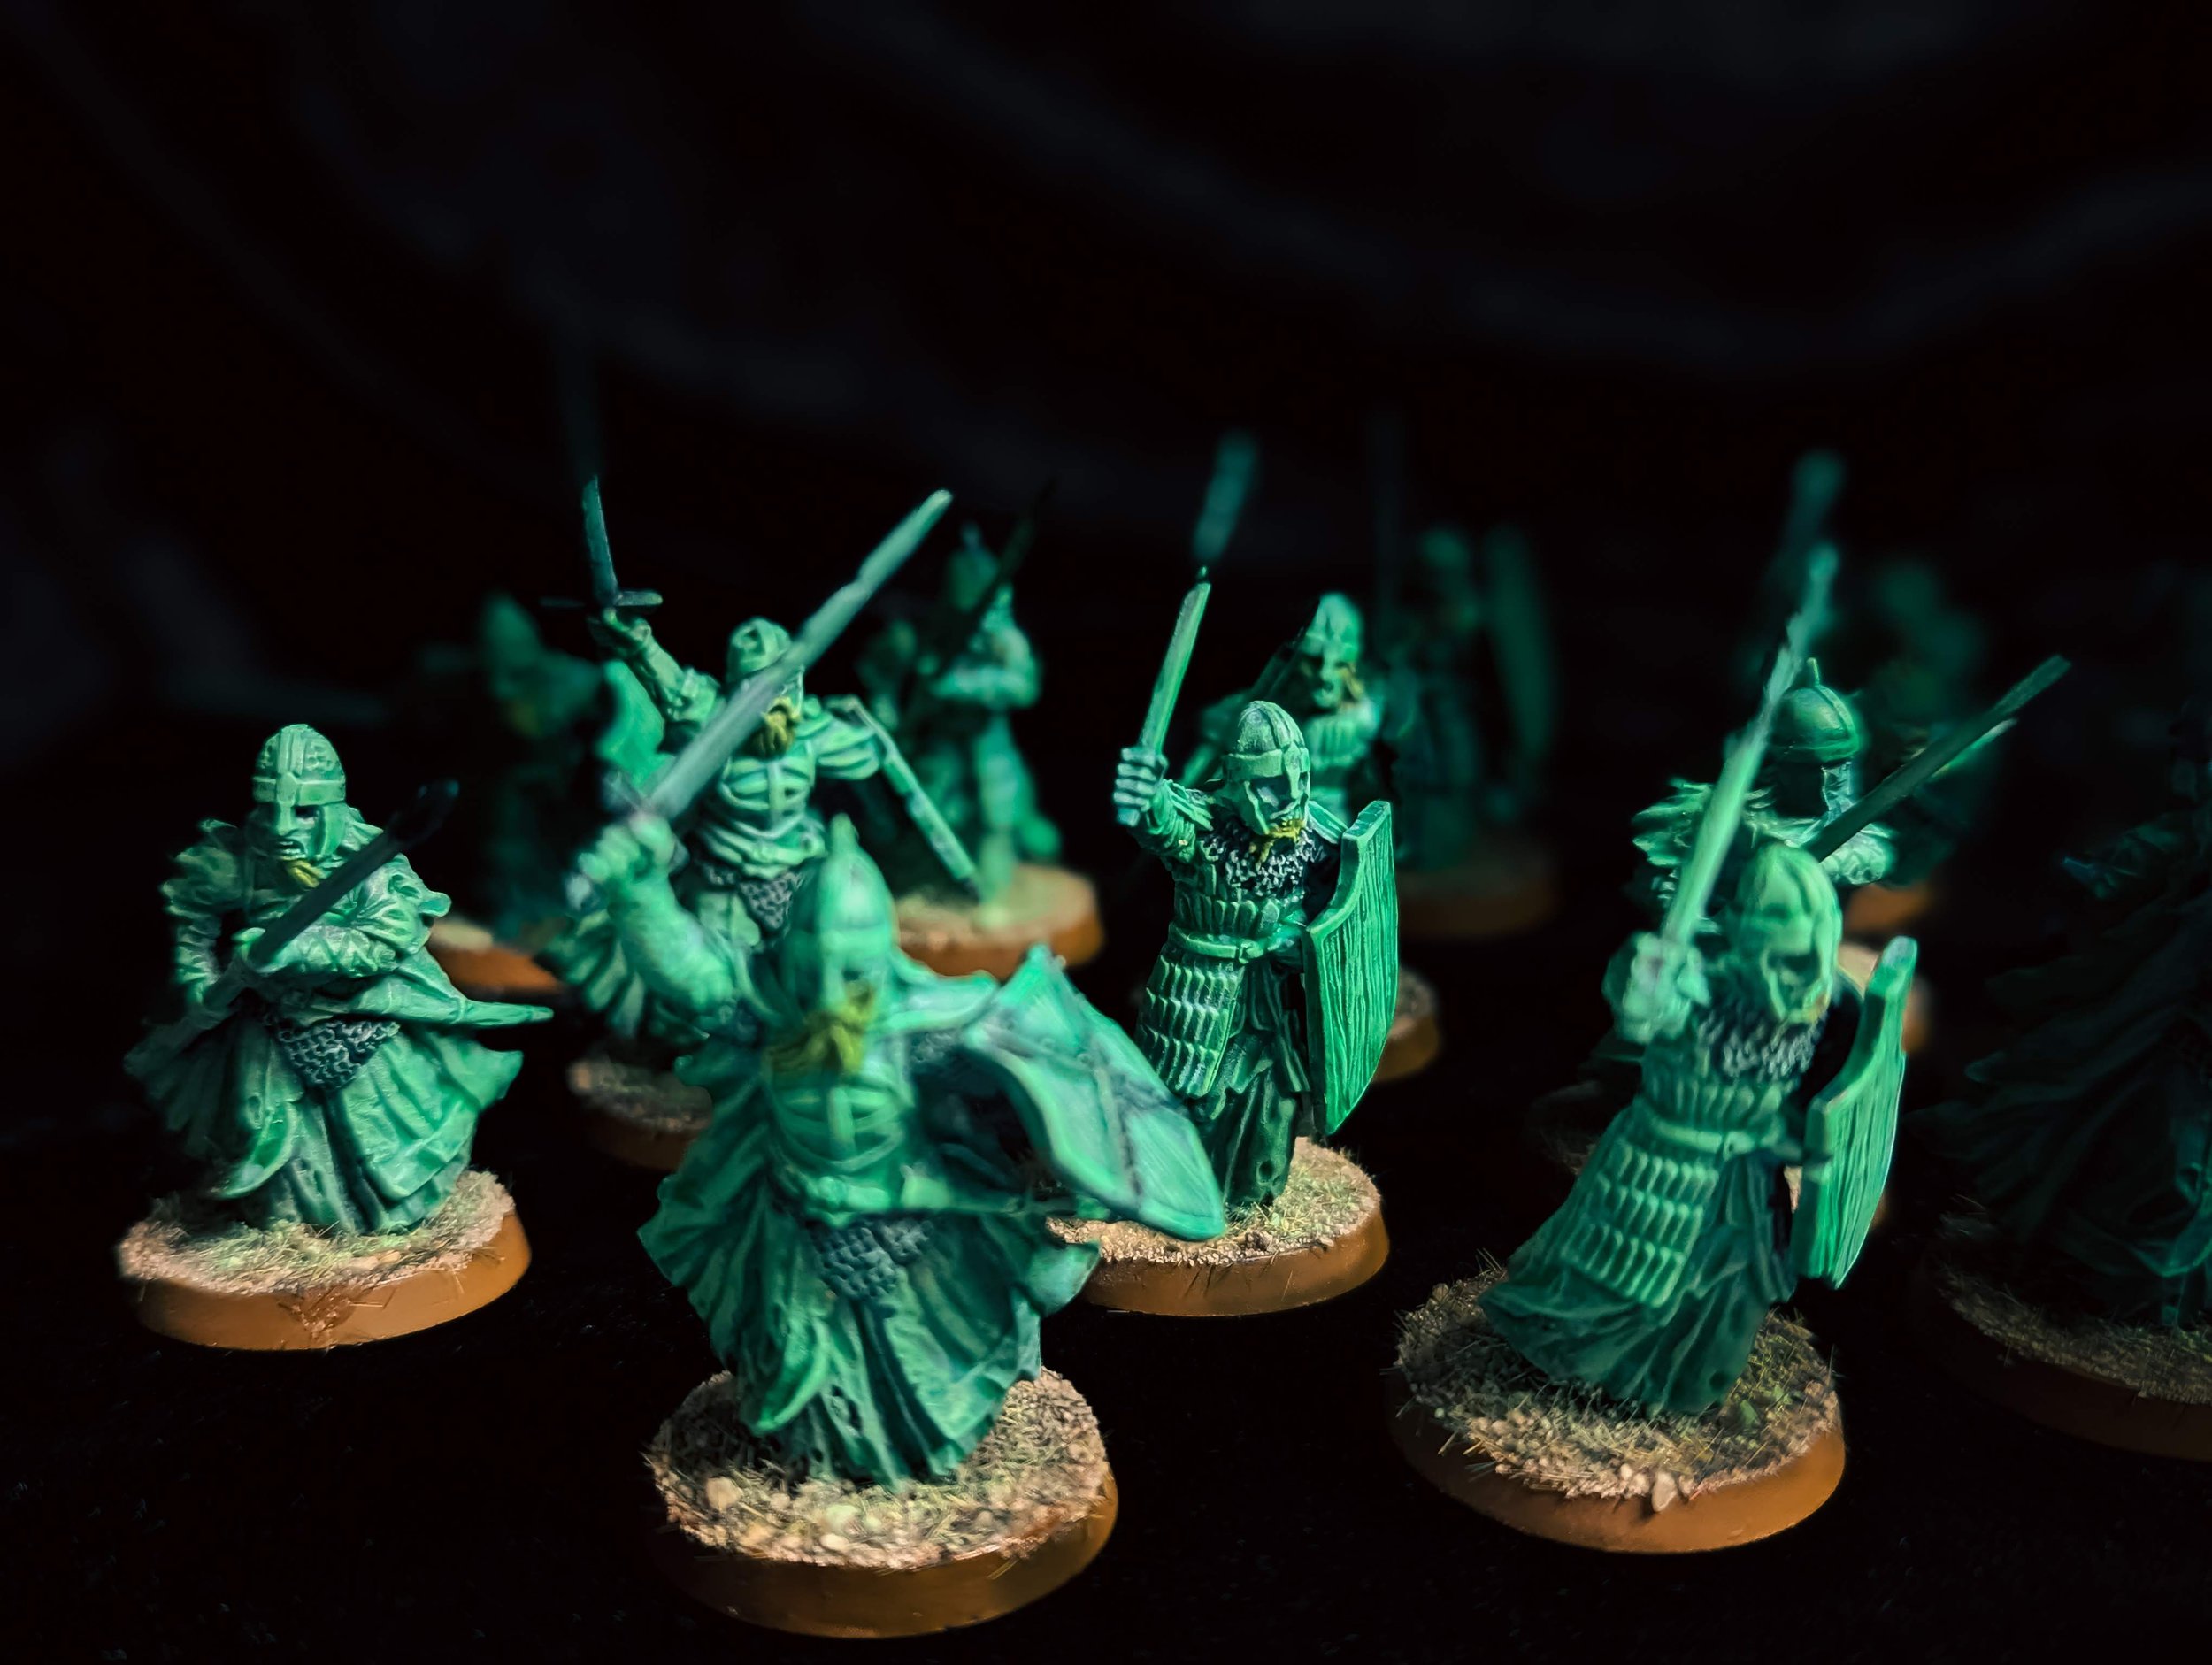  Games Workshop Army of the Dead painted miniatures on a black background 